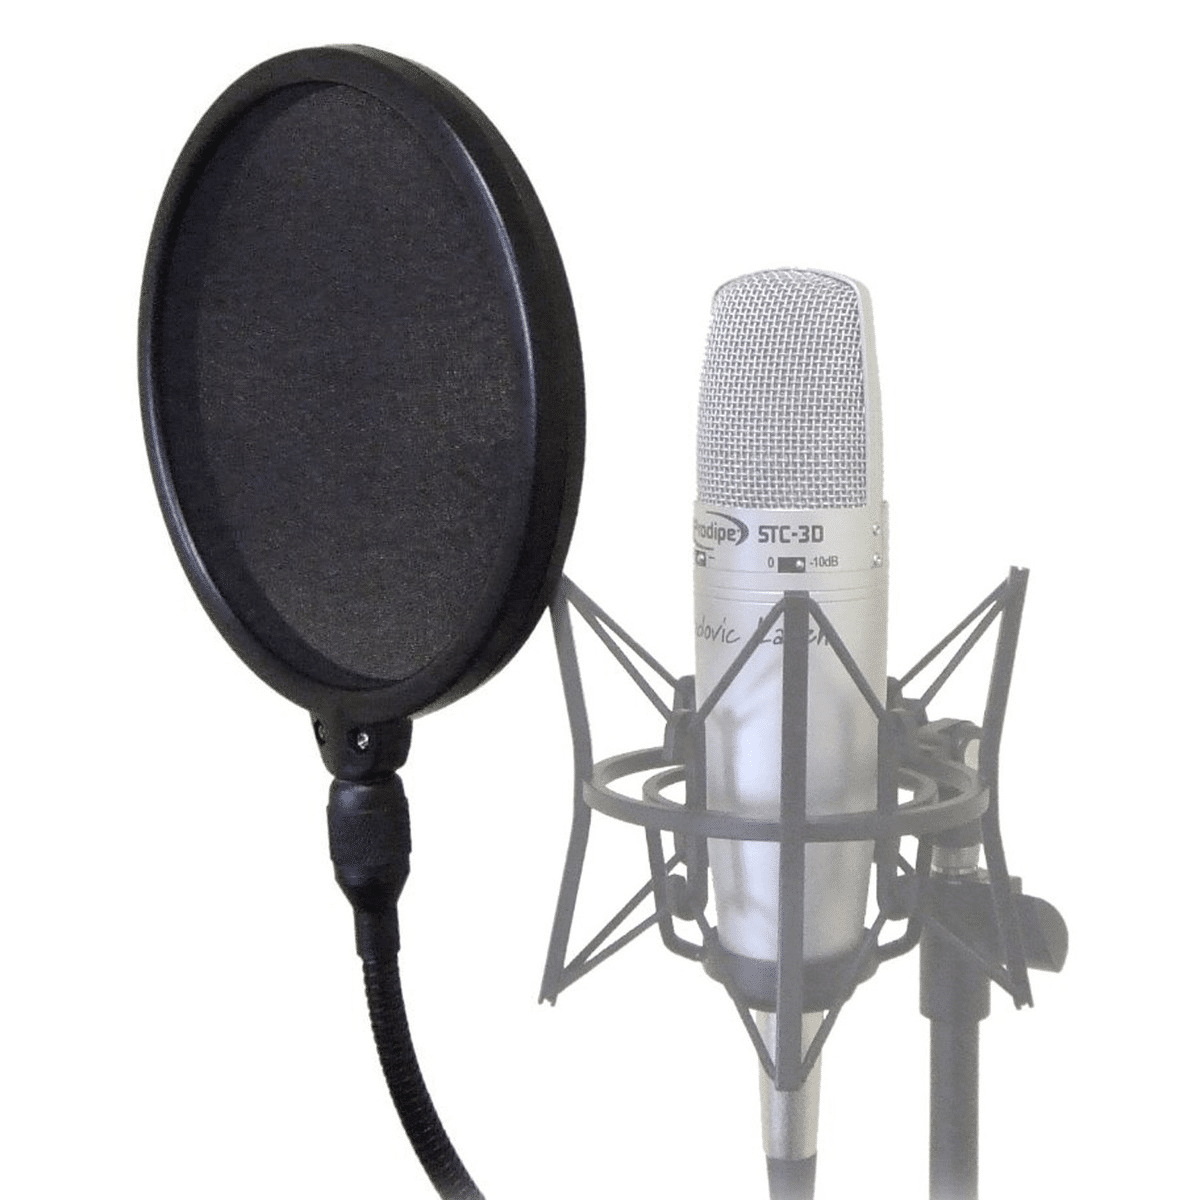 A pop filter in front of a mic